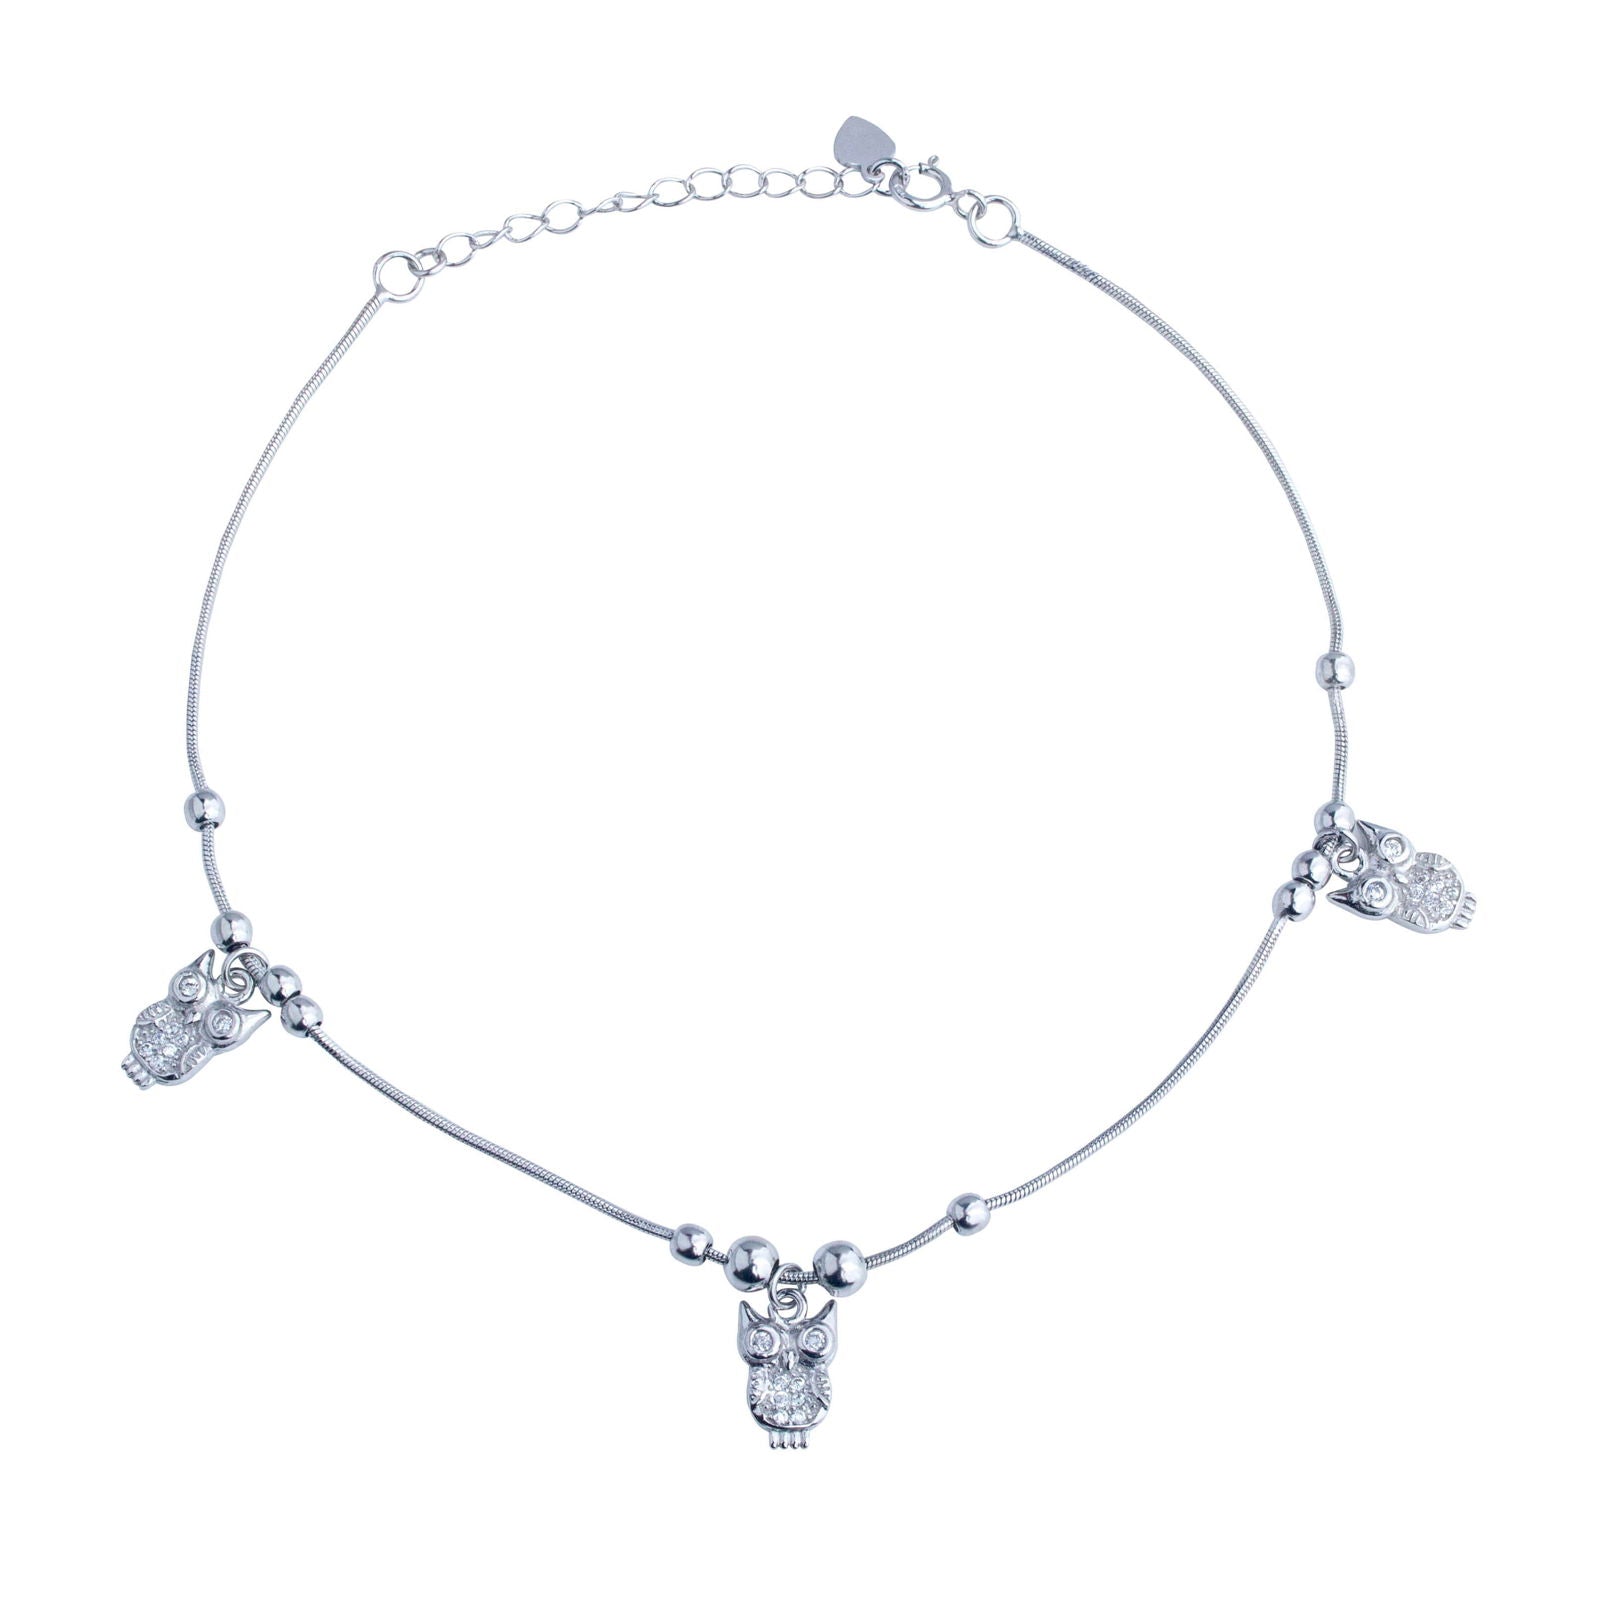 RRJ0337 Pure 925 Sterling Silver Single Anklet - RishiRich Jewels